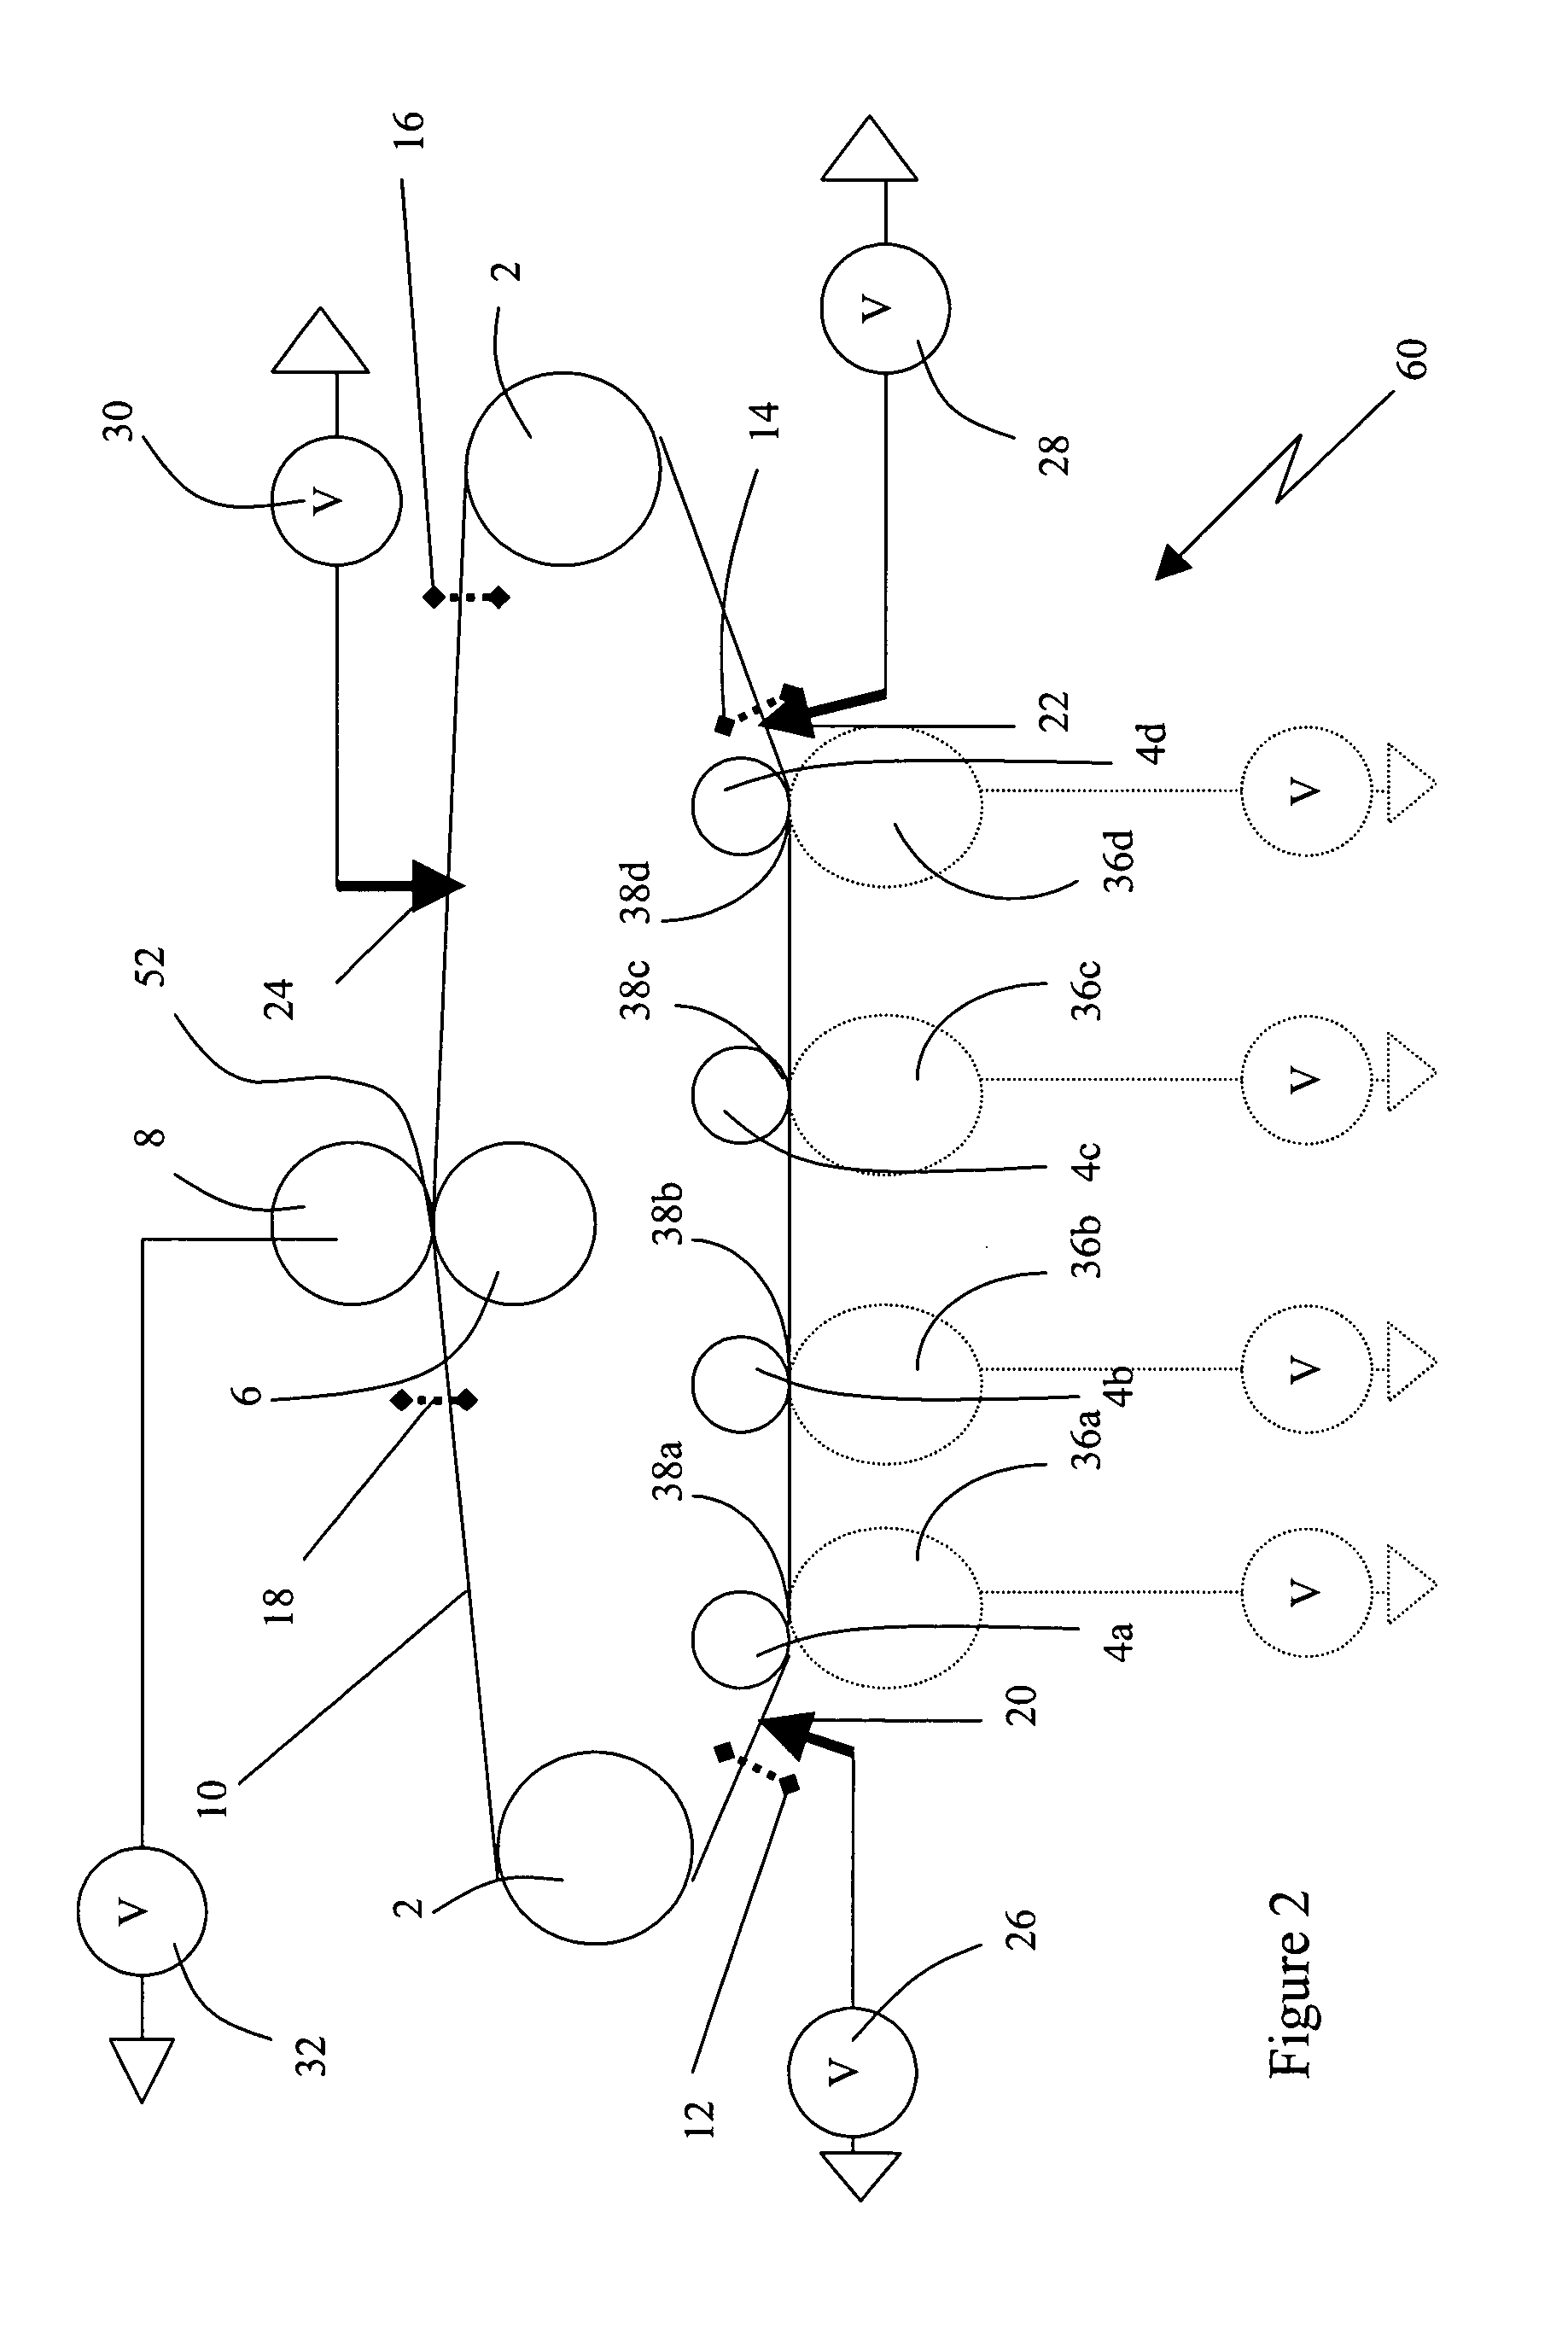 Intermediate transfer member for carrying intermediate electrophotographic image